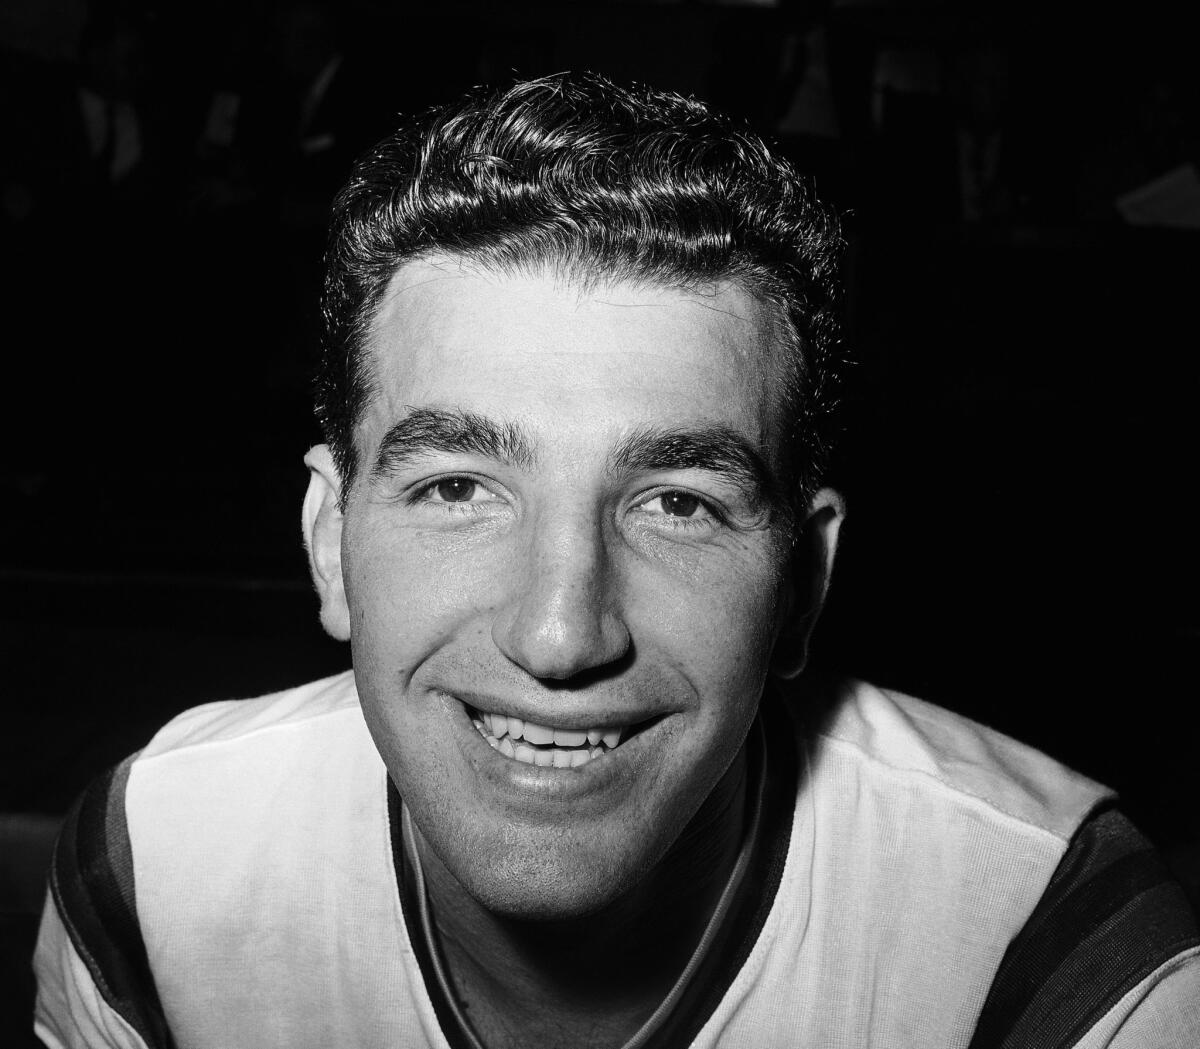 Syracuse Nationals center Dolph Schayes smiles in New York on Nov. 14, 1961. Schayes, a 12-time All-Star and NBA Hall of Famer, died at 87.